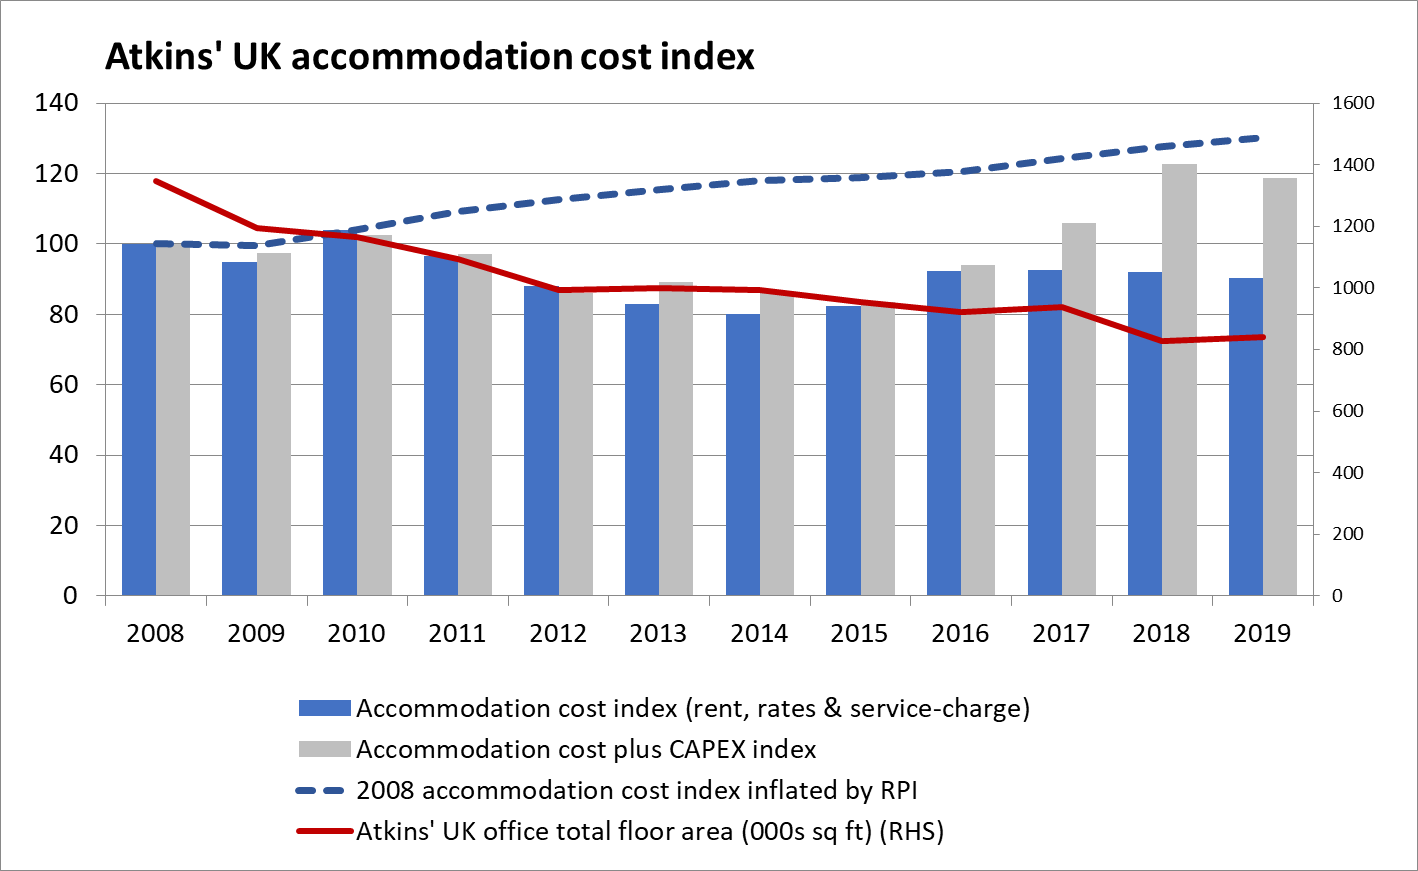 Accommodation cost index